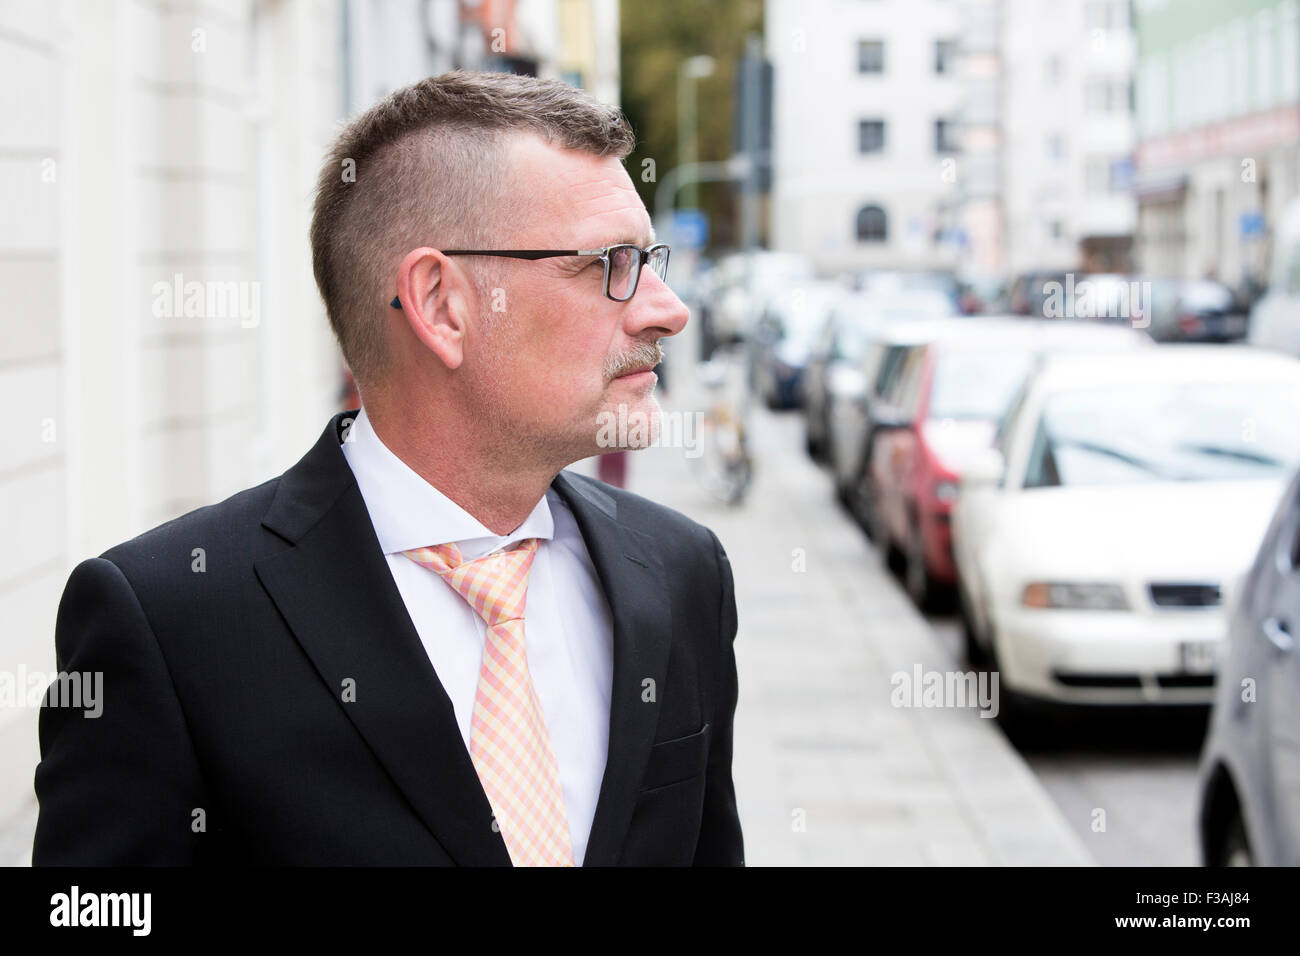 portrait of businessman with hipster haircut standing in the street Stock Photo